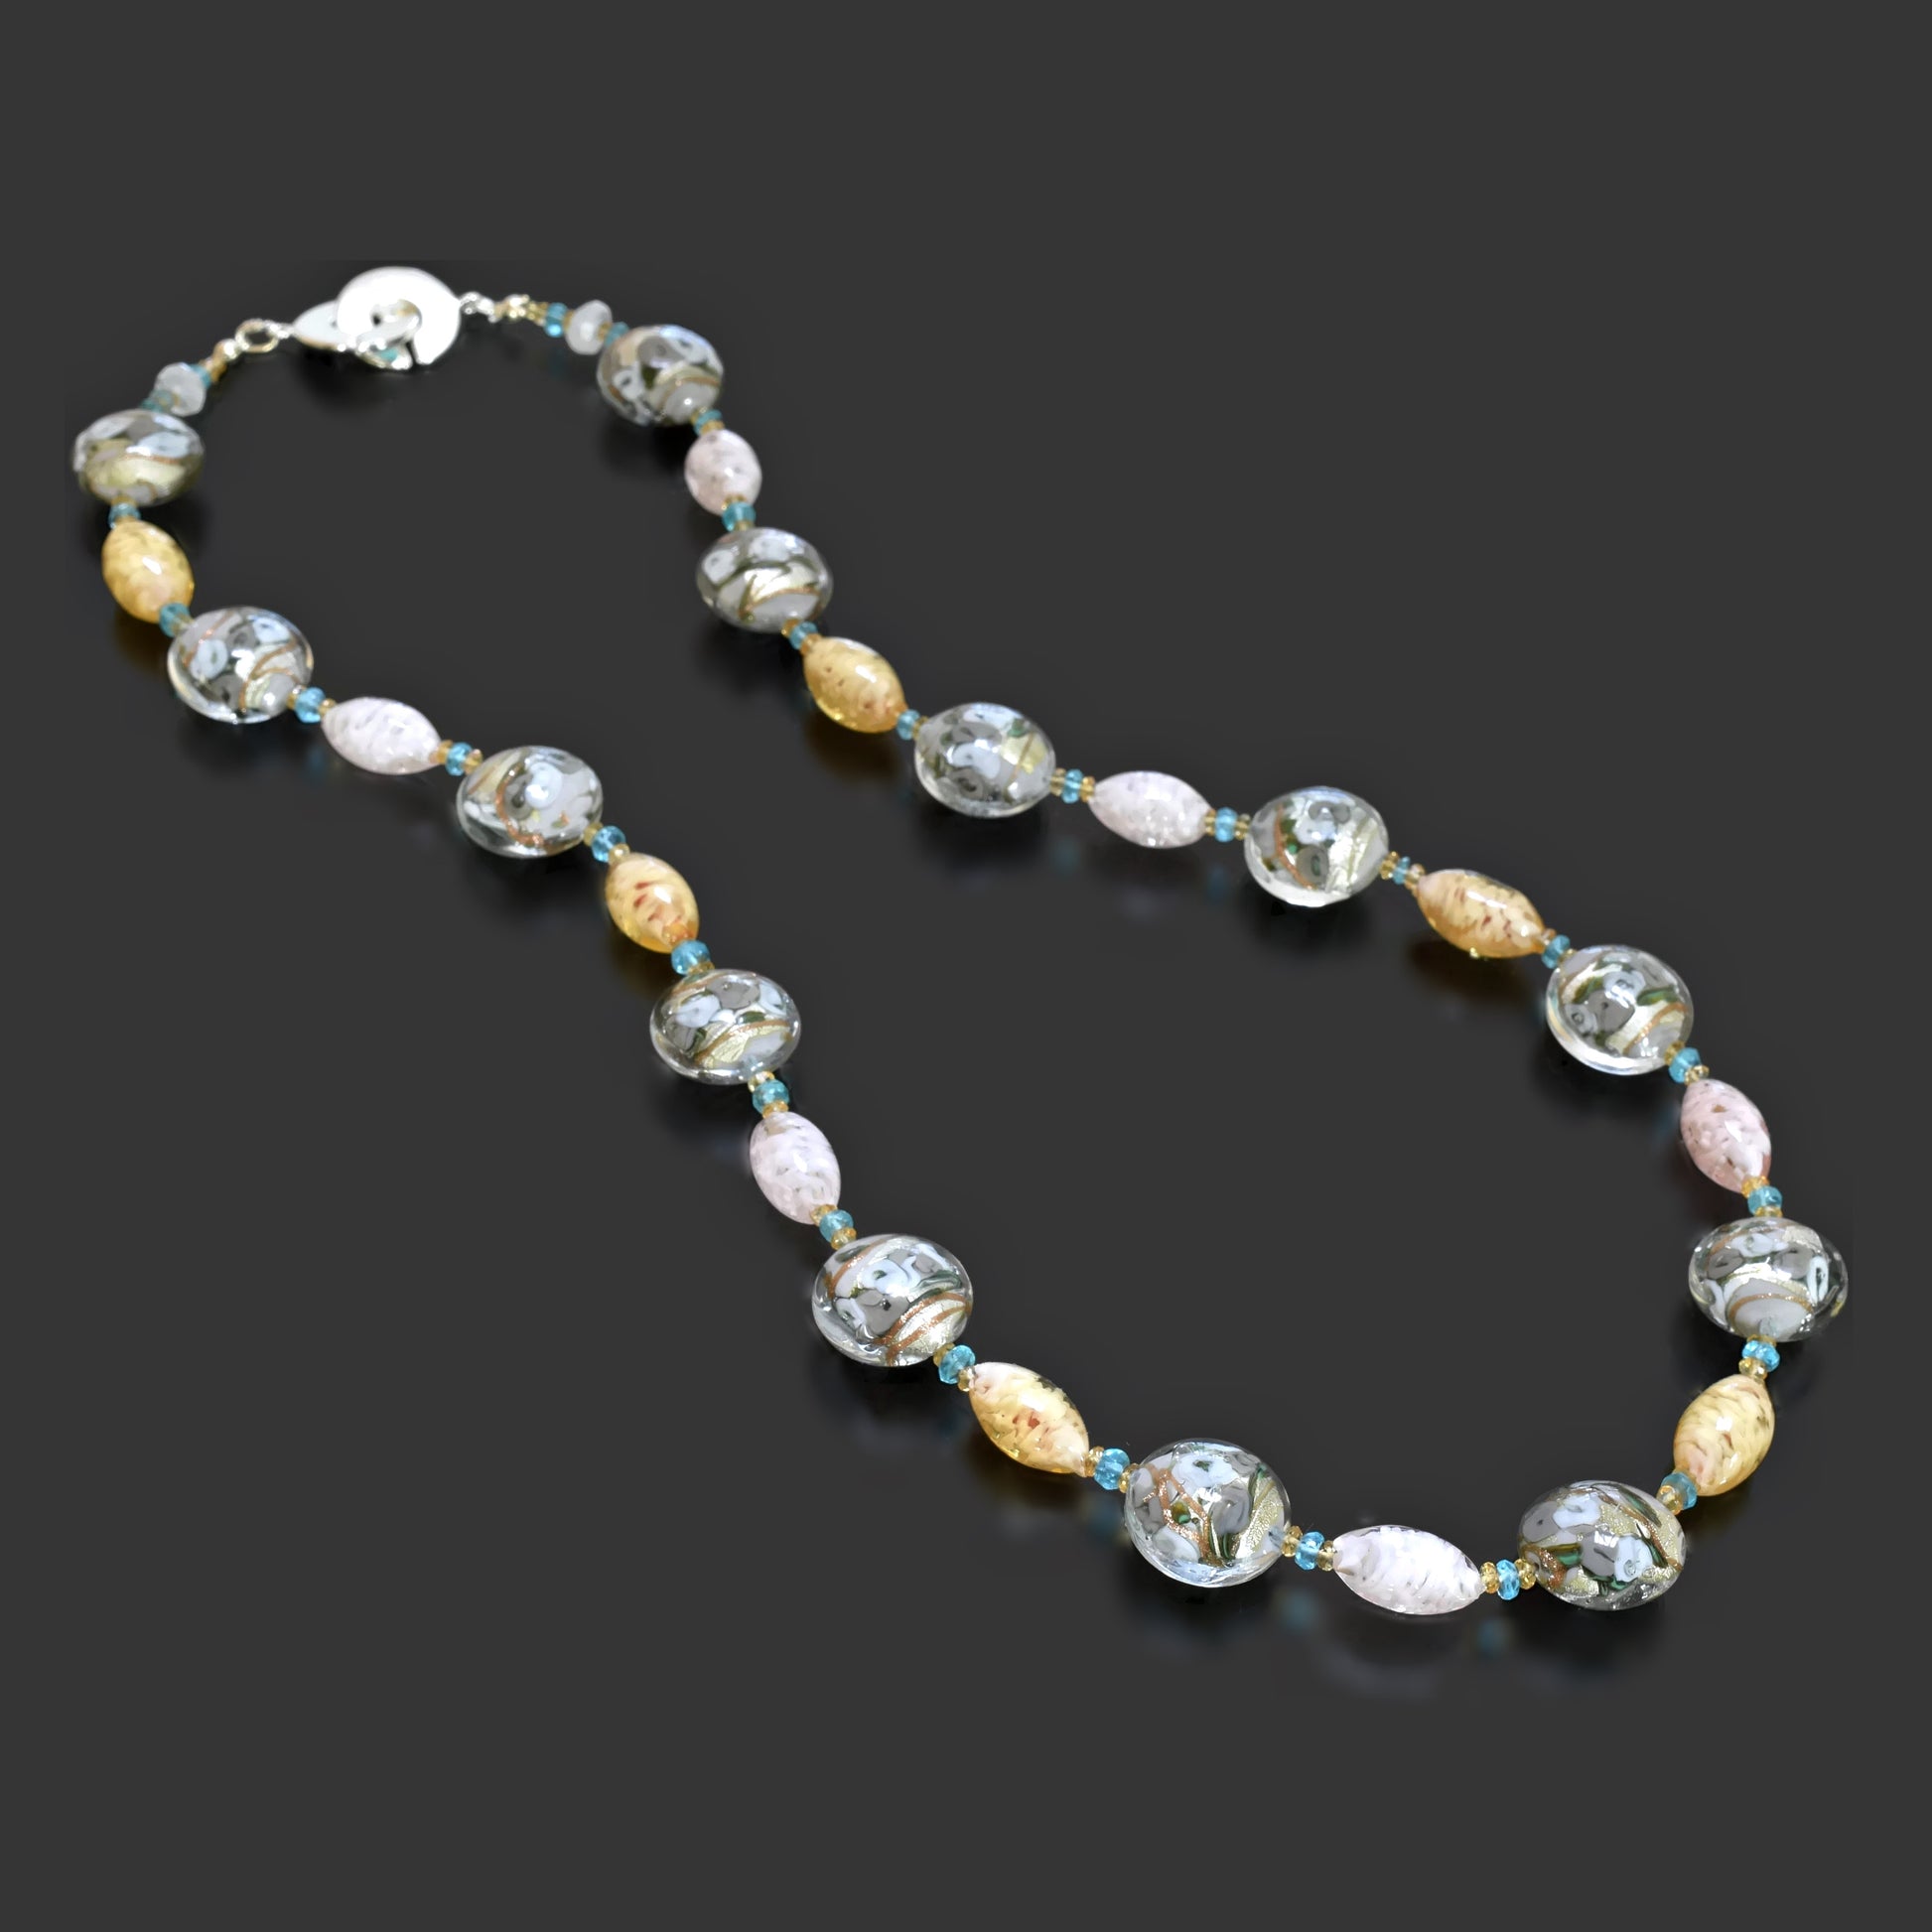 Grey and Gold Murano Glass Necklace with Citrine and Apatite Sterling Silver Pink Only